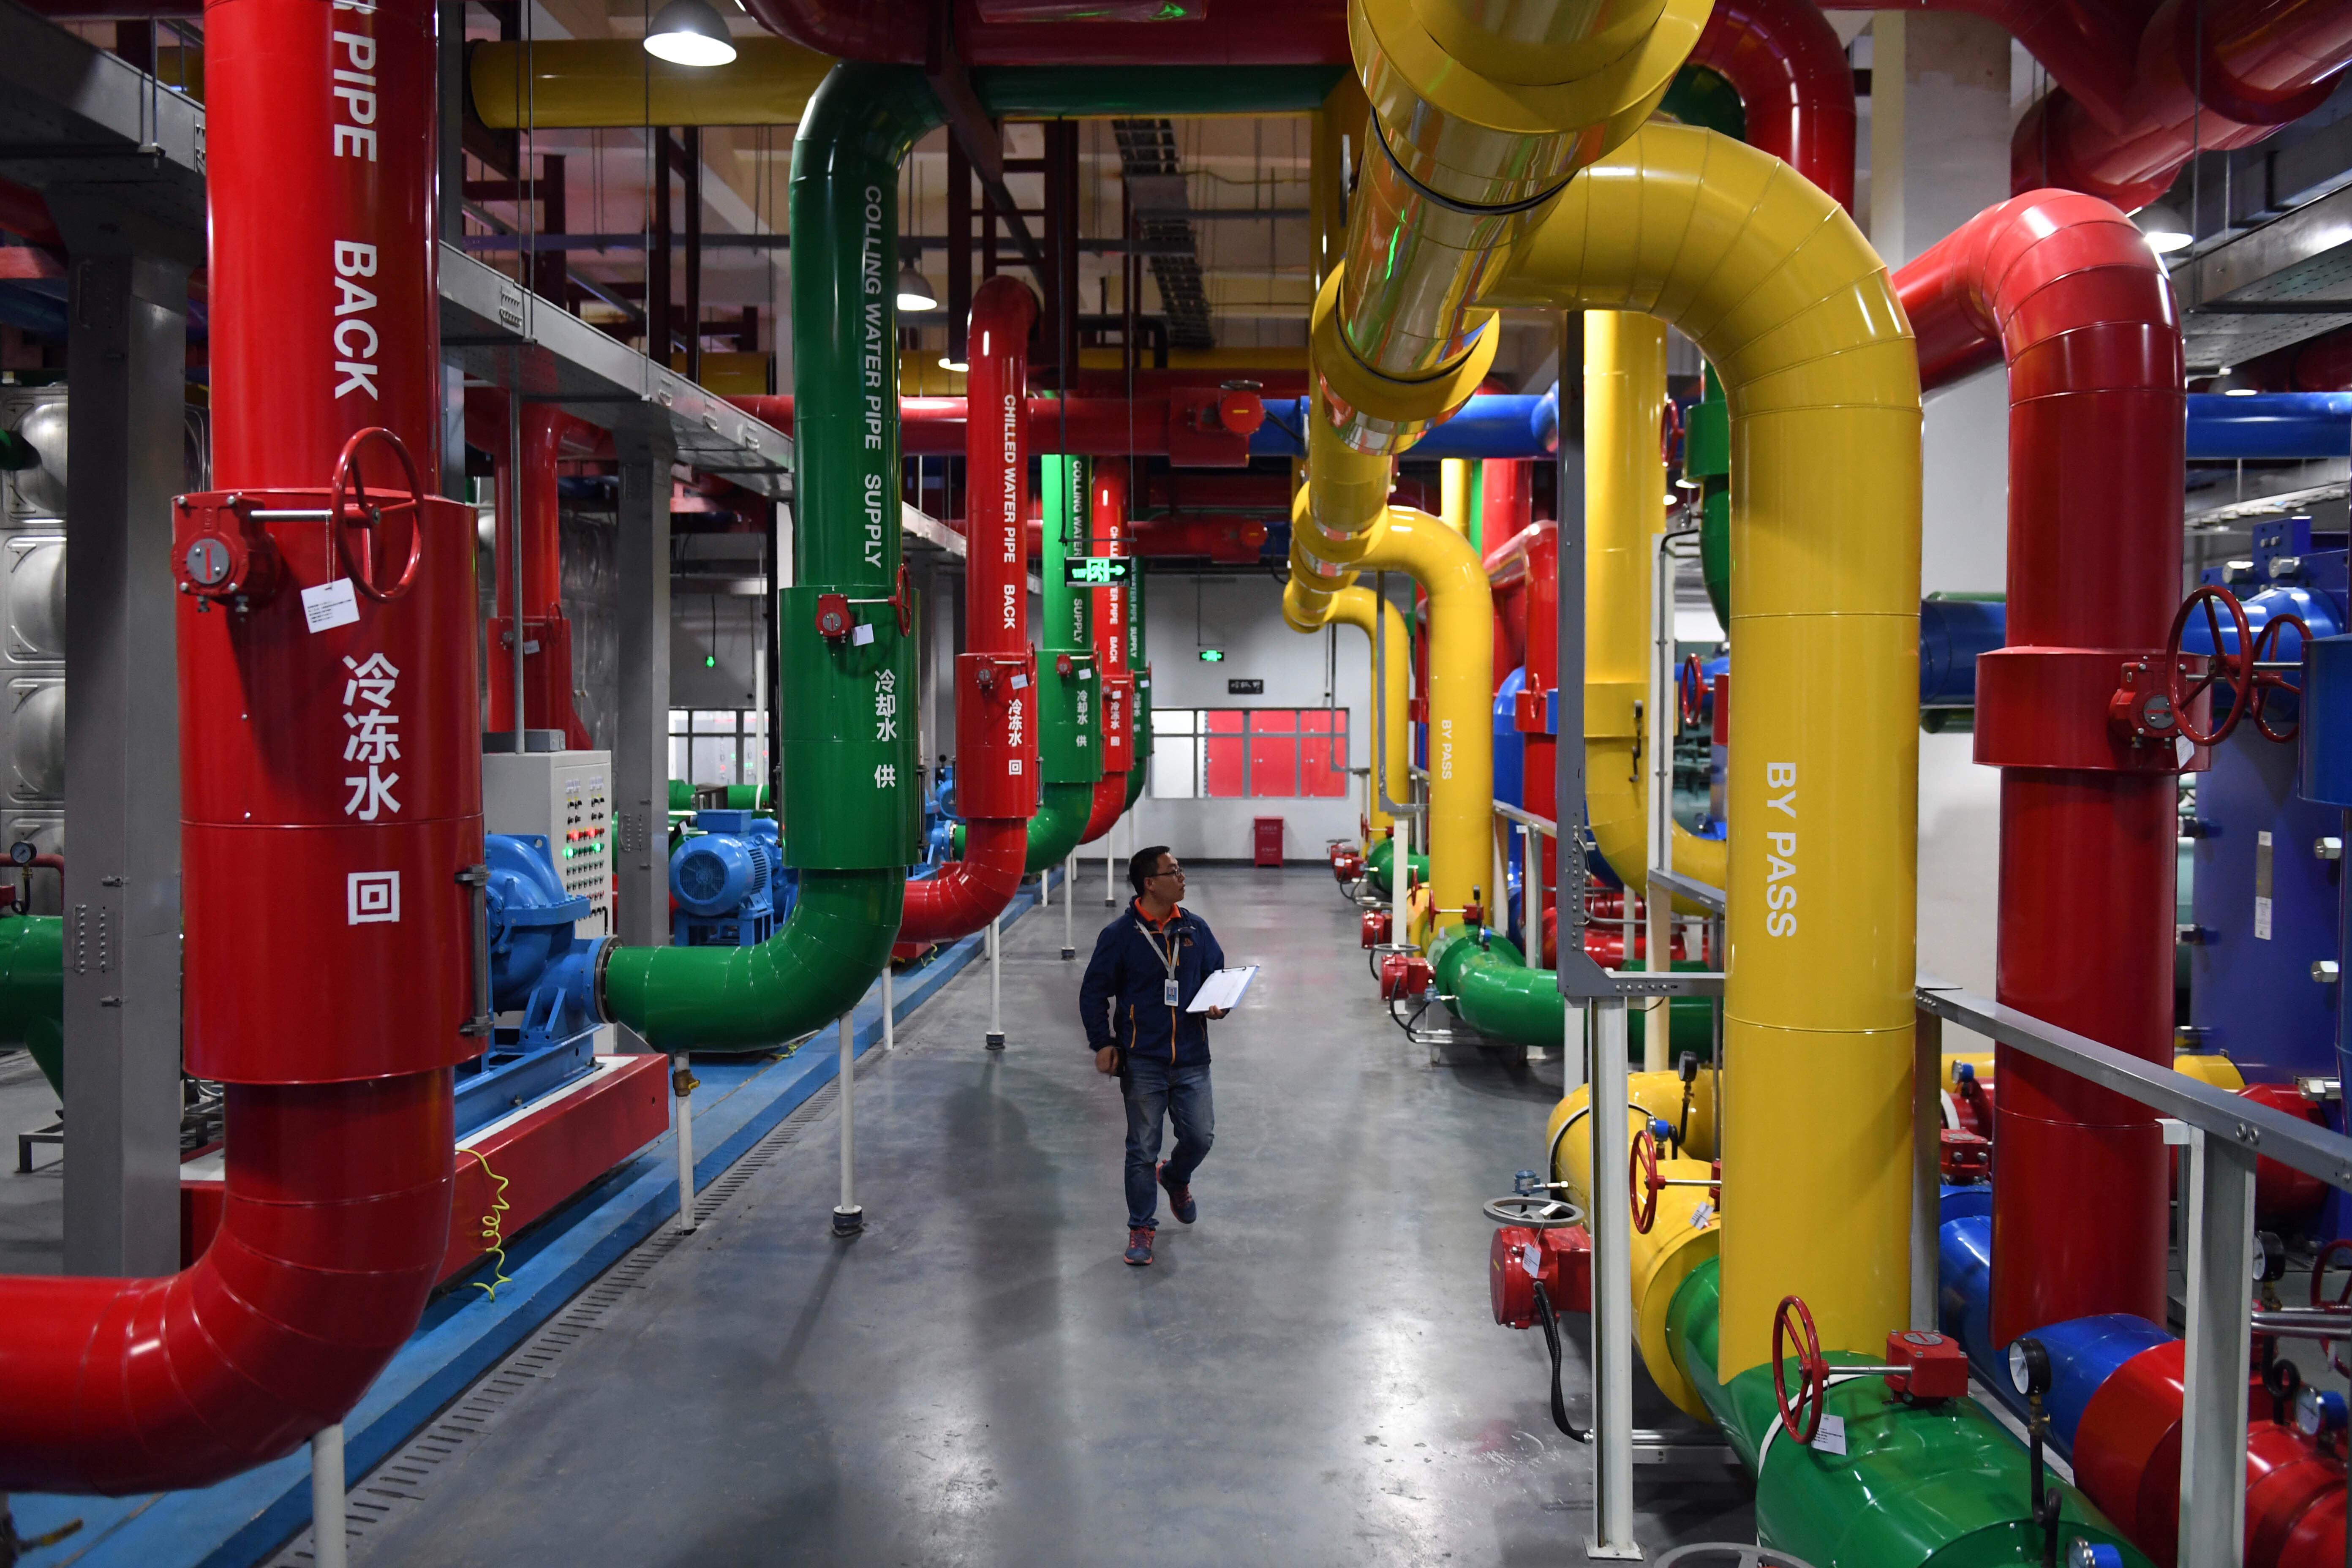 A technician examines the pipeline at Alibaba's data center in Zhangbei County, north China's Hebei Province.